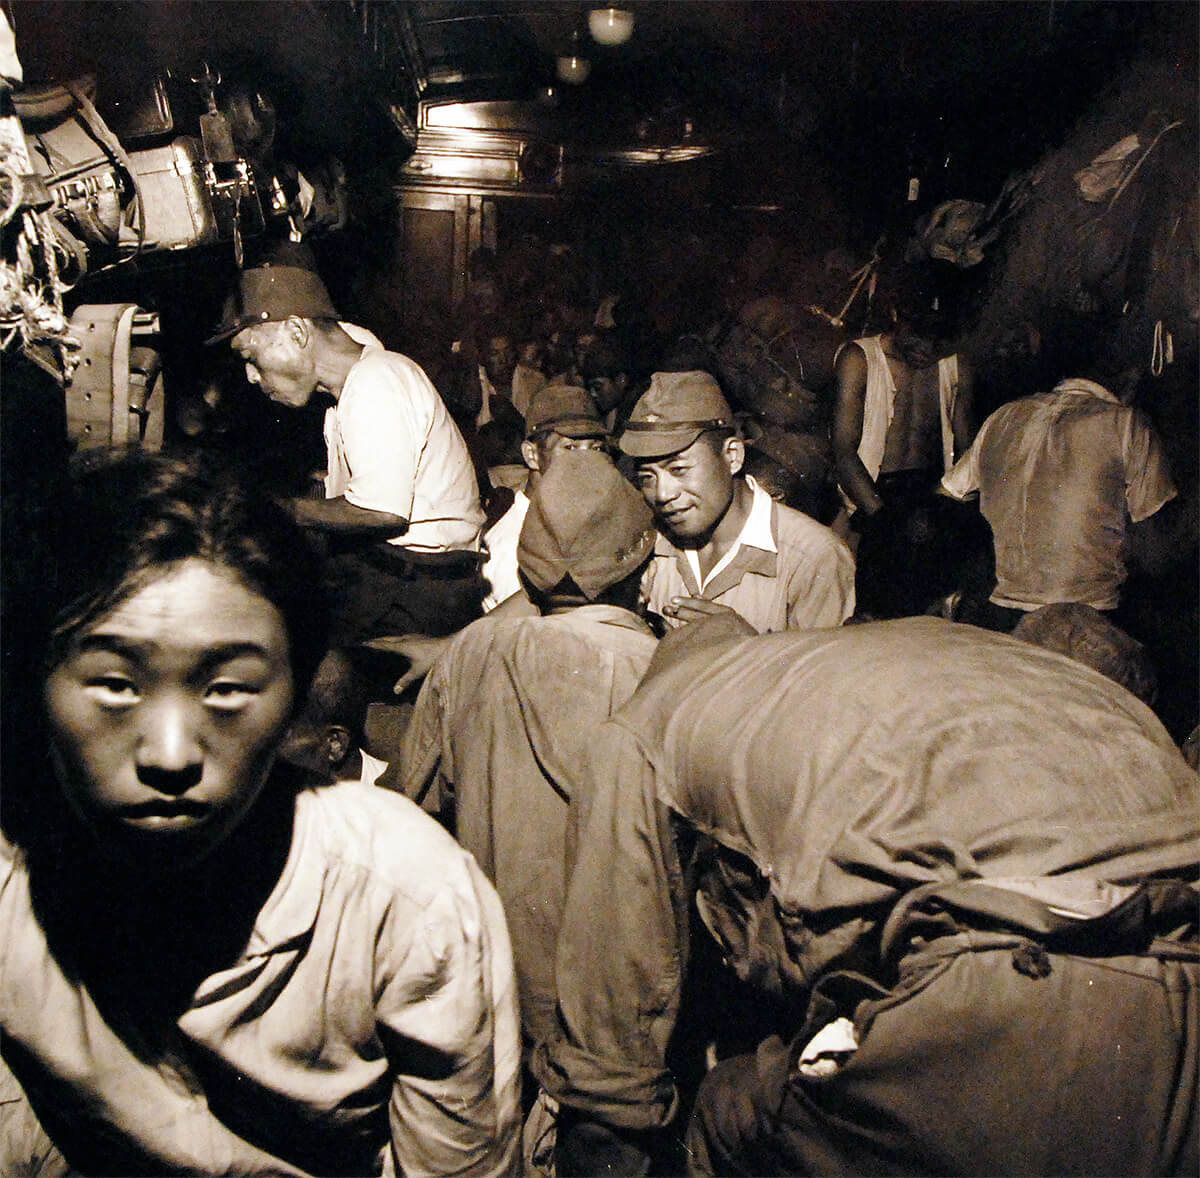 Demobilized Japanese soldiers and civilians aboard a train in Hiroshima, Japan, Sep 1945,  National Museum of the United States Navy<p>© Wayne Miller</p>